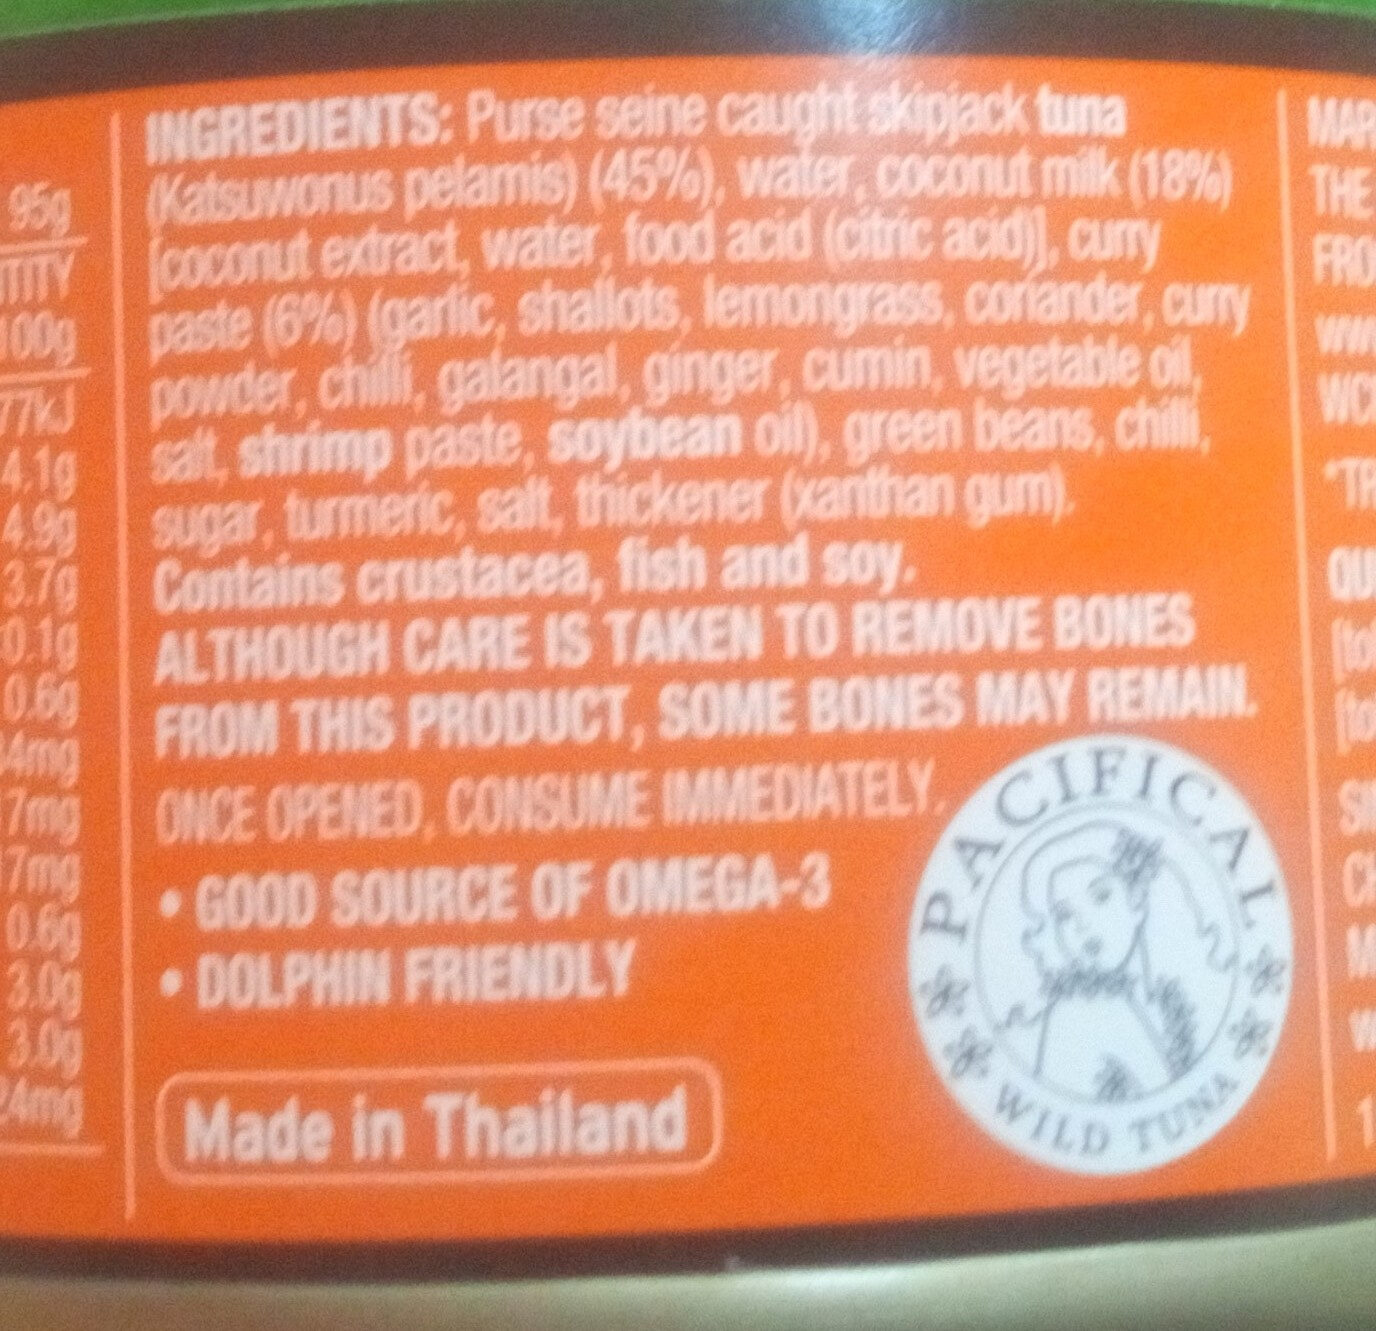 Malaysian Curry & Tuna (Special Edition, Street Asian) - Ingredients - en